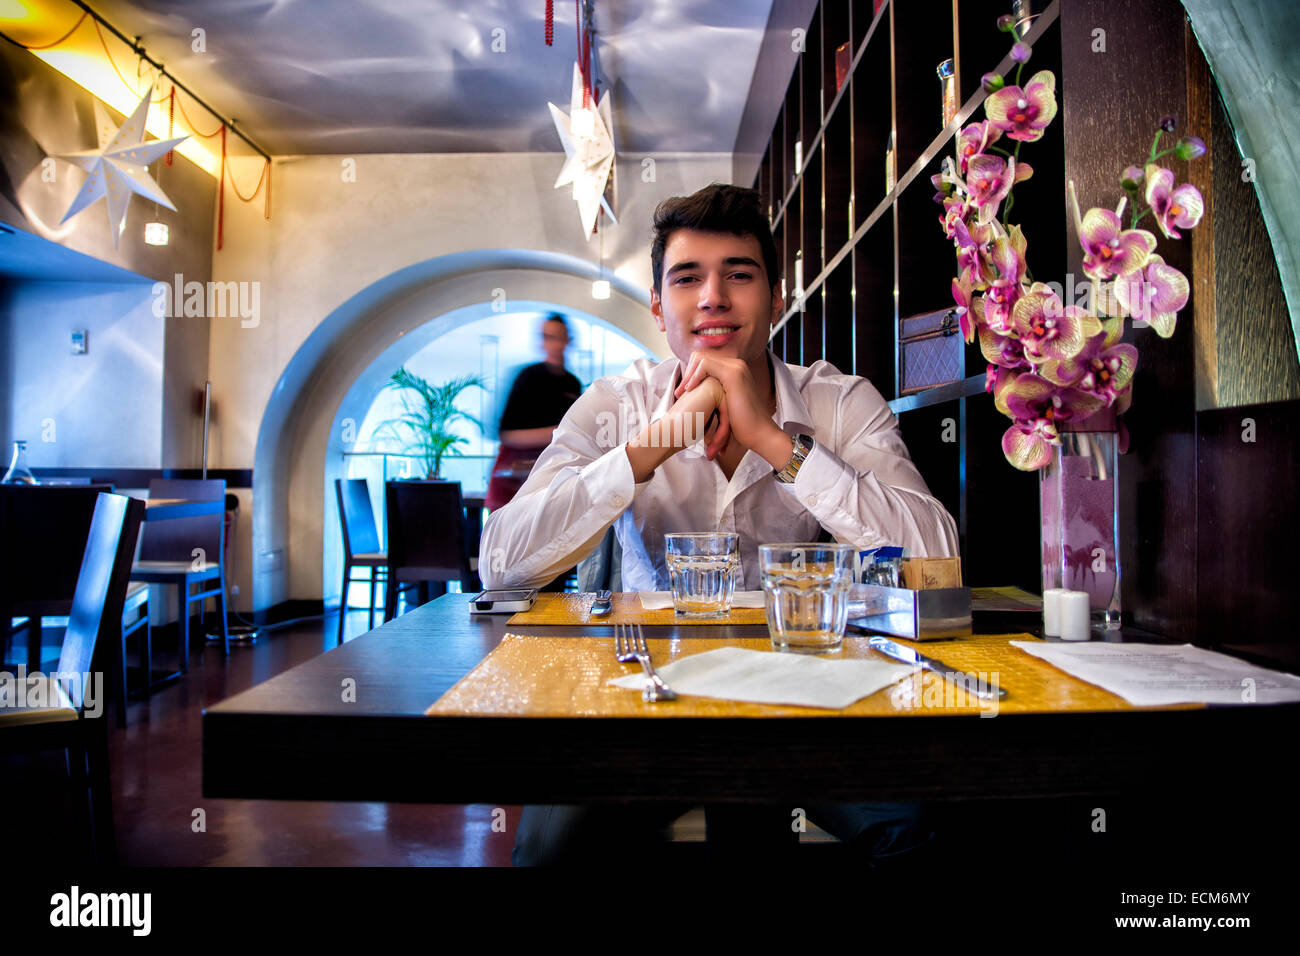 Handsome young man having lunch in elegant restaurant alone smiling and looking at camera Stock Photo